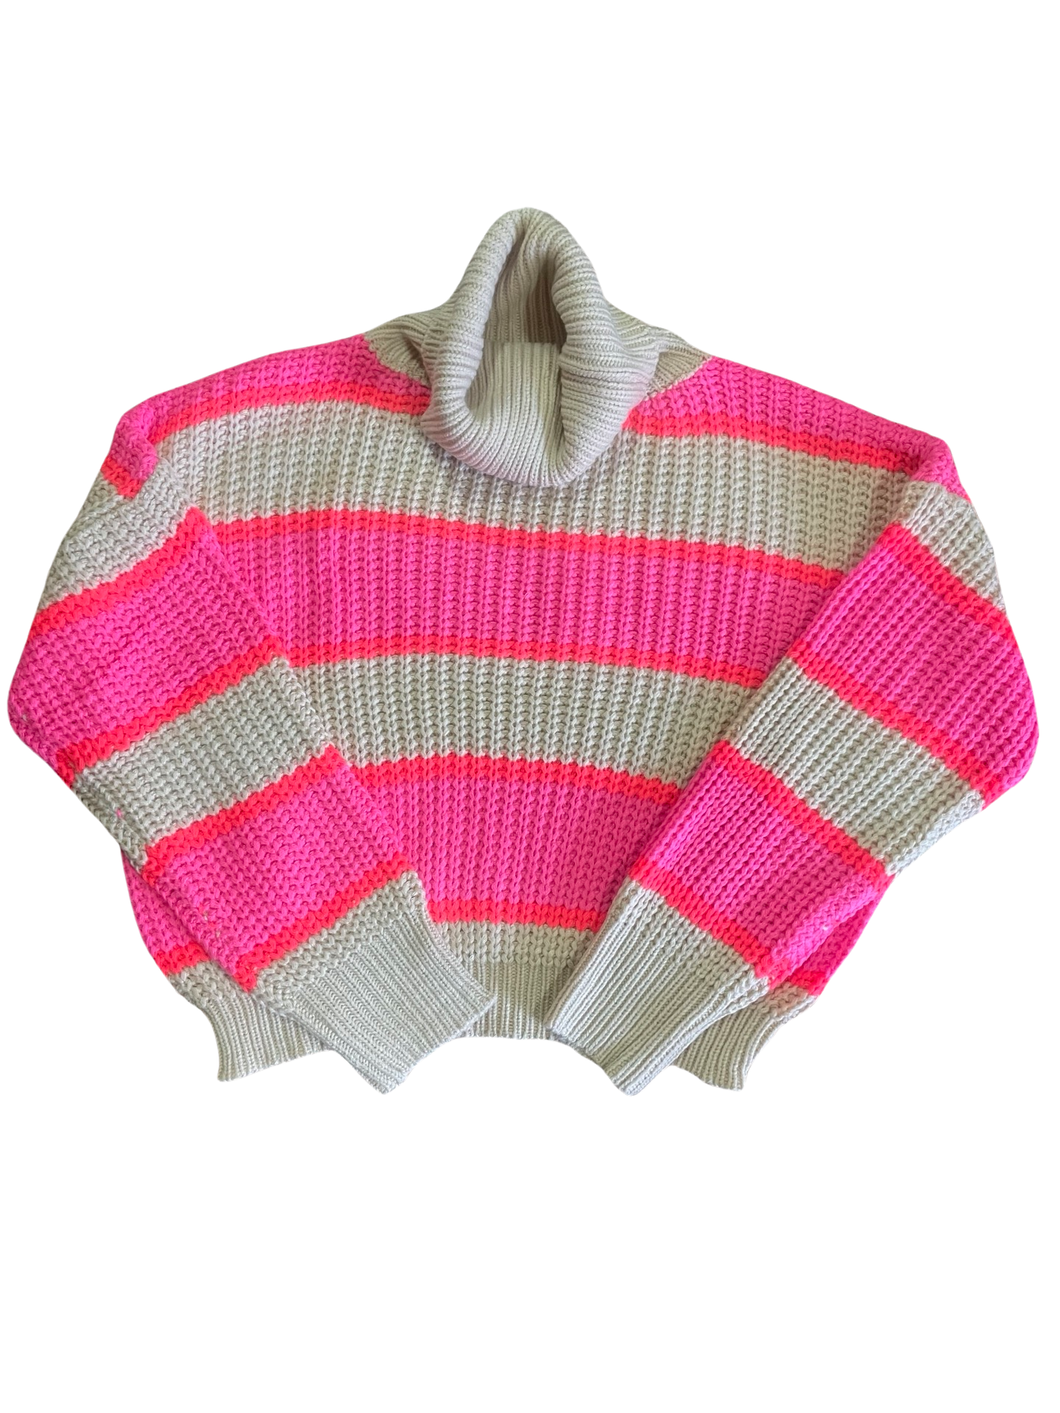 Nude and Neon Sweater